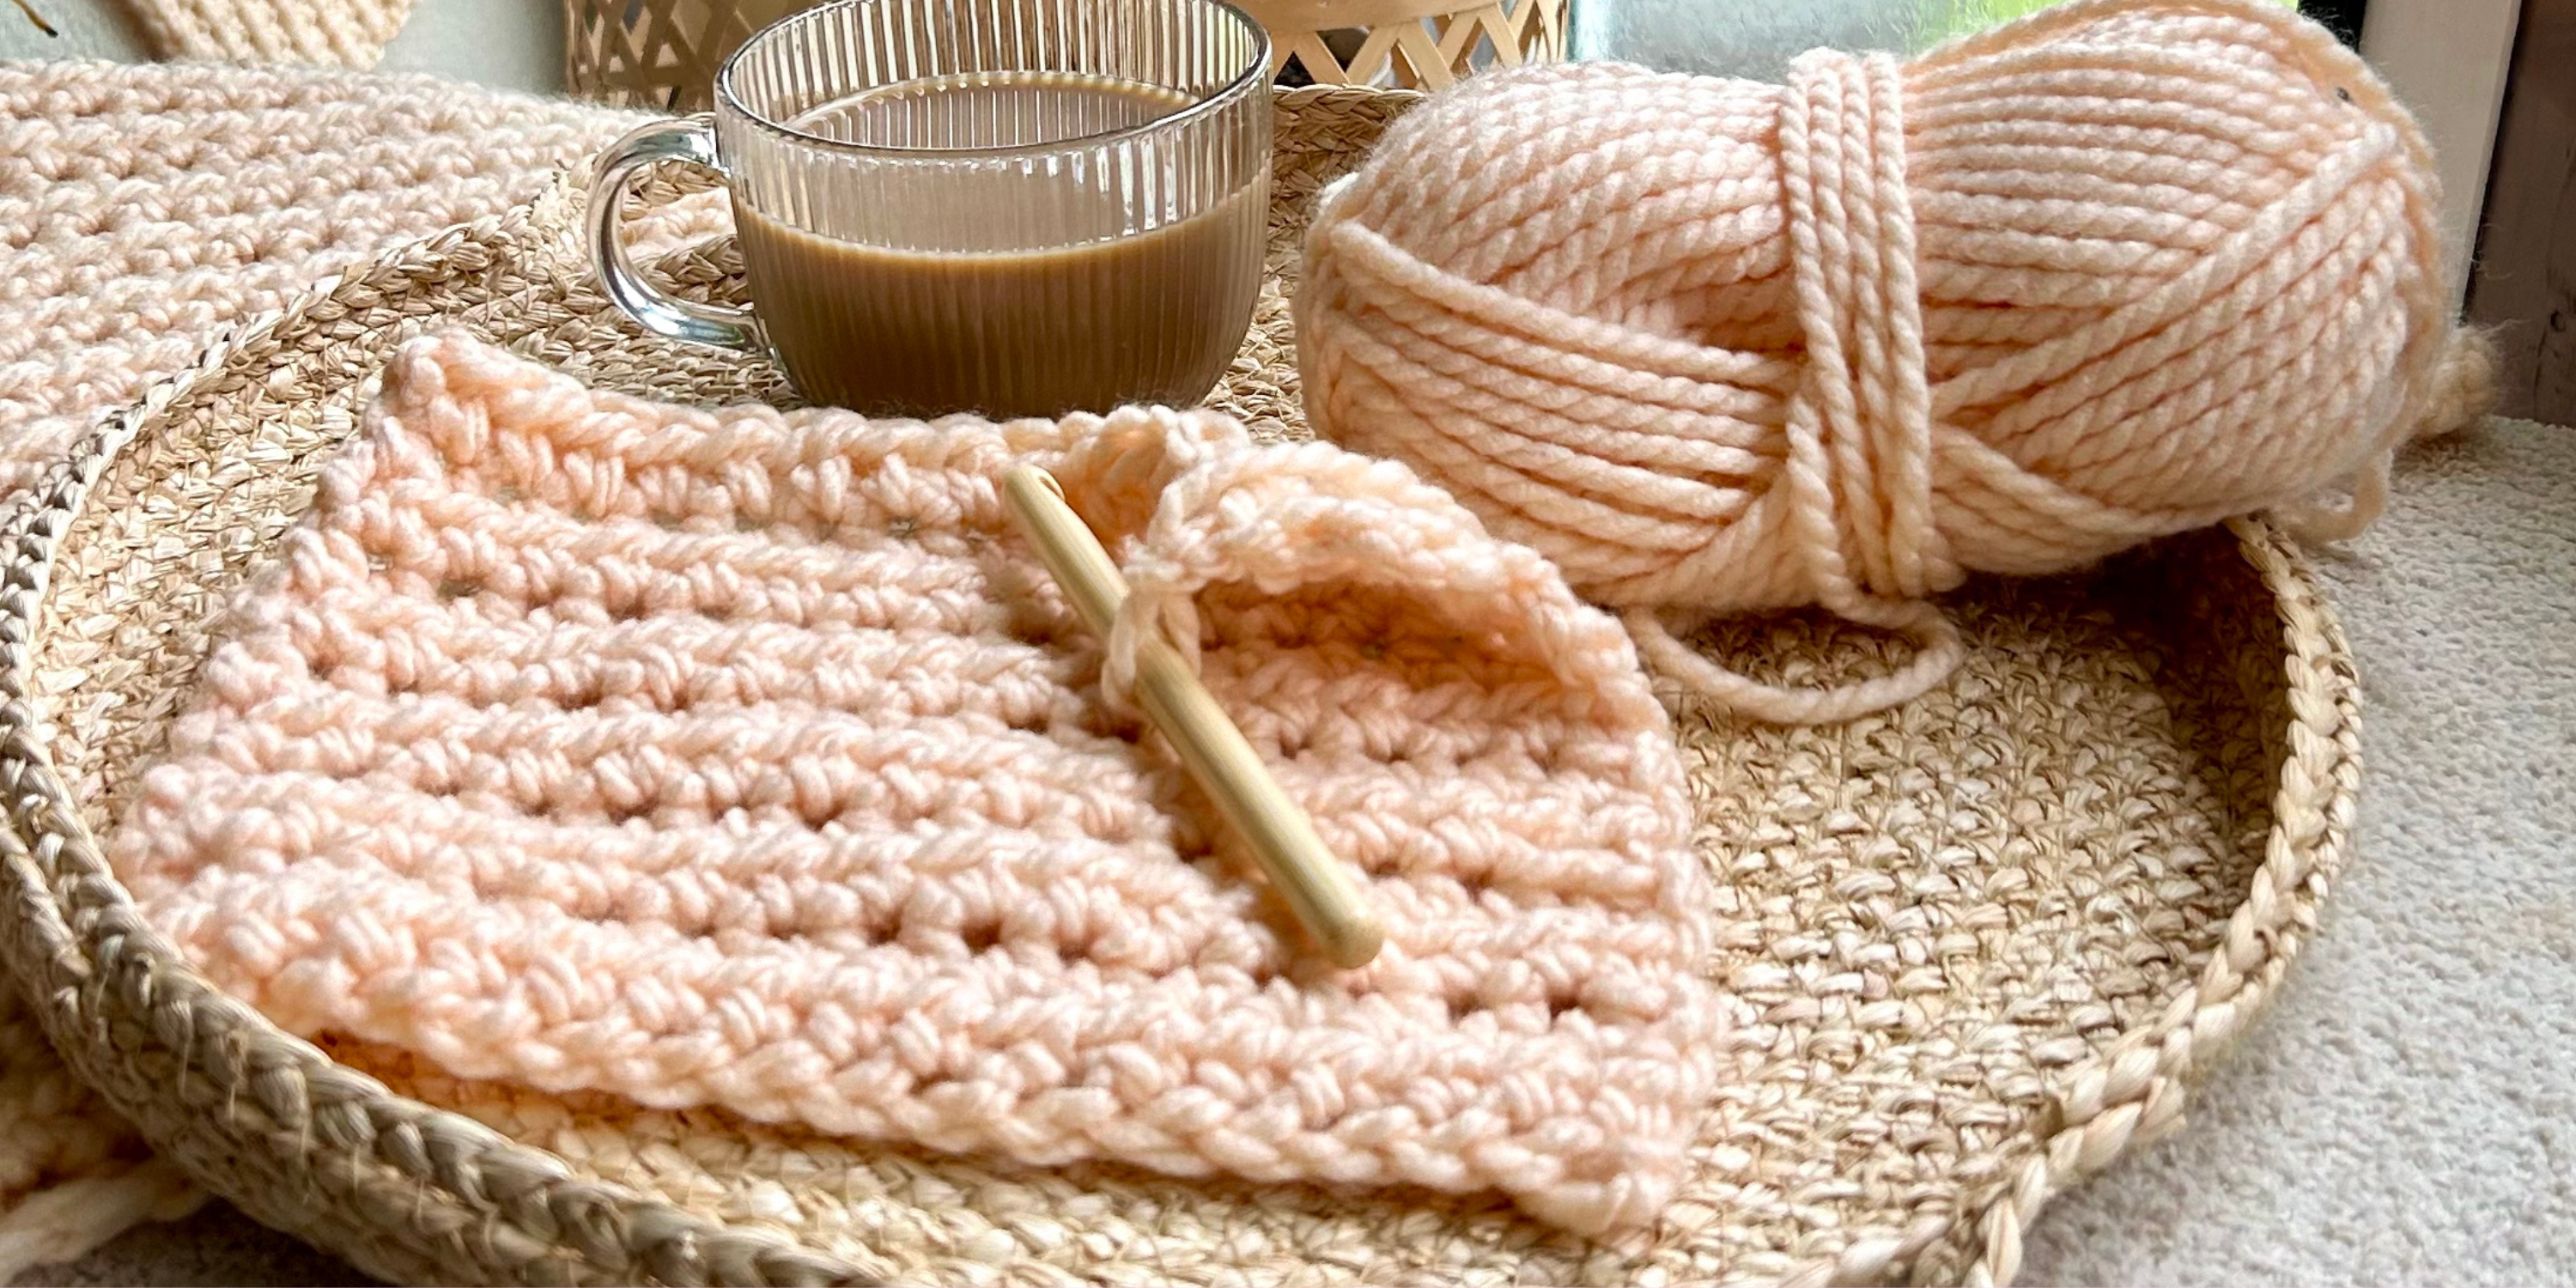 beginner crochet kits and patterns - learn how to crochet with us